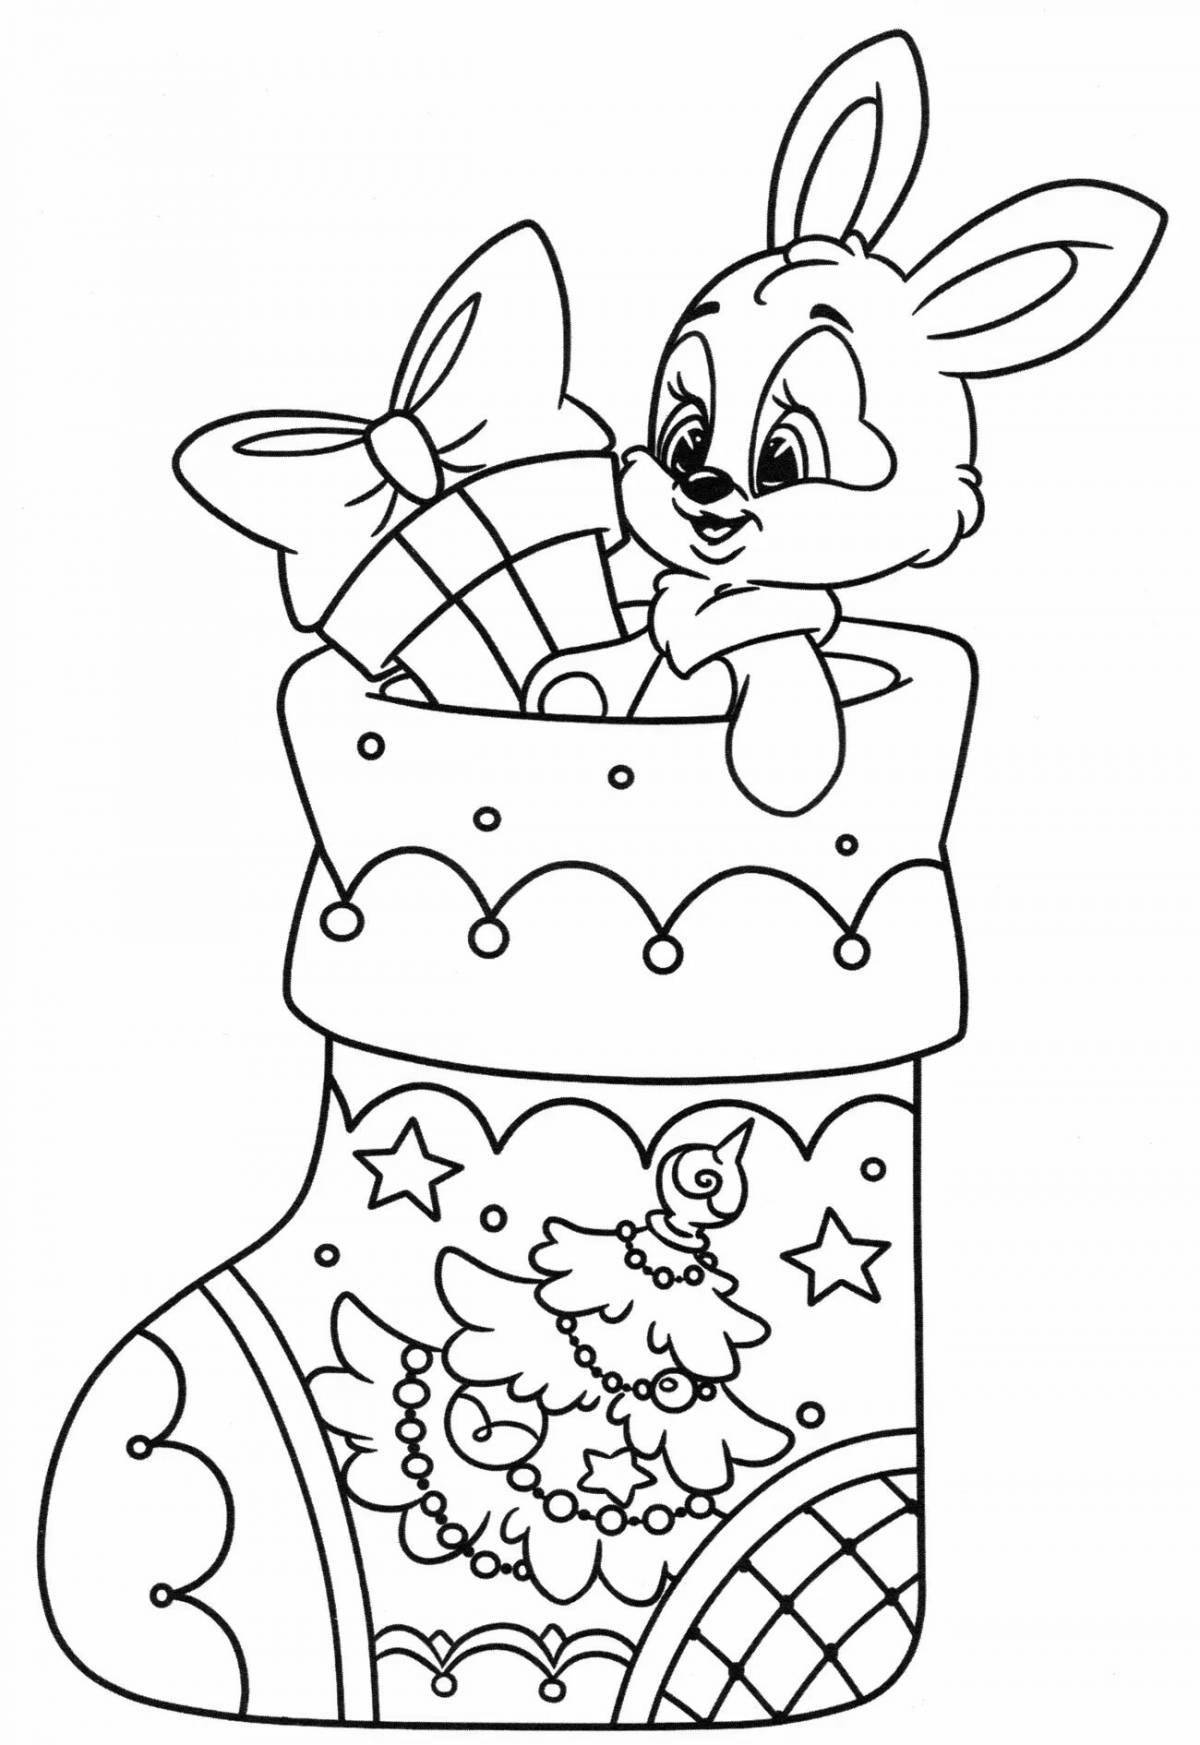 Sparkling Christmas rabbit coloring page